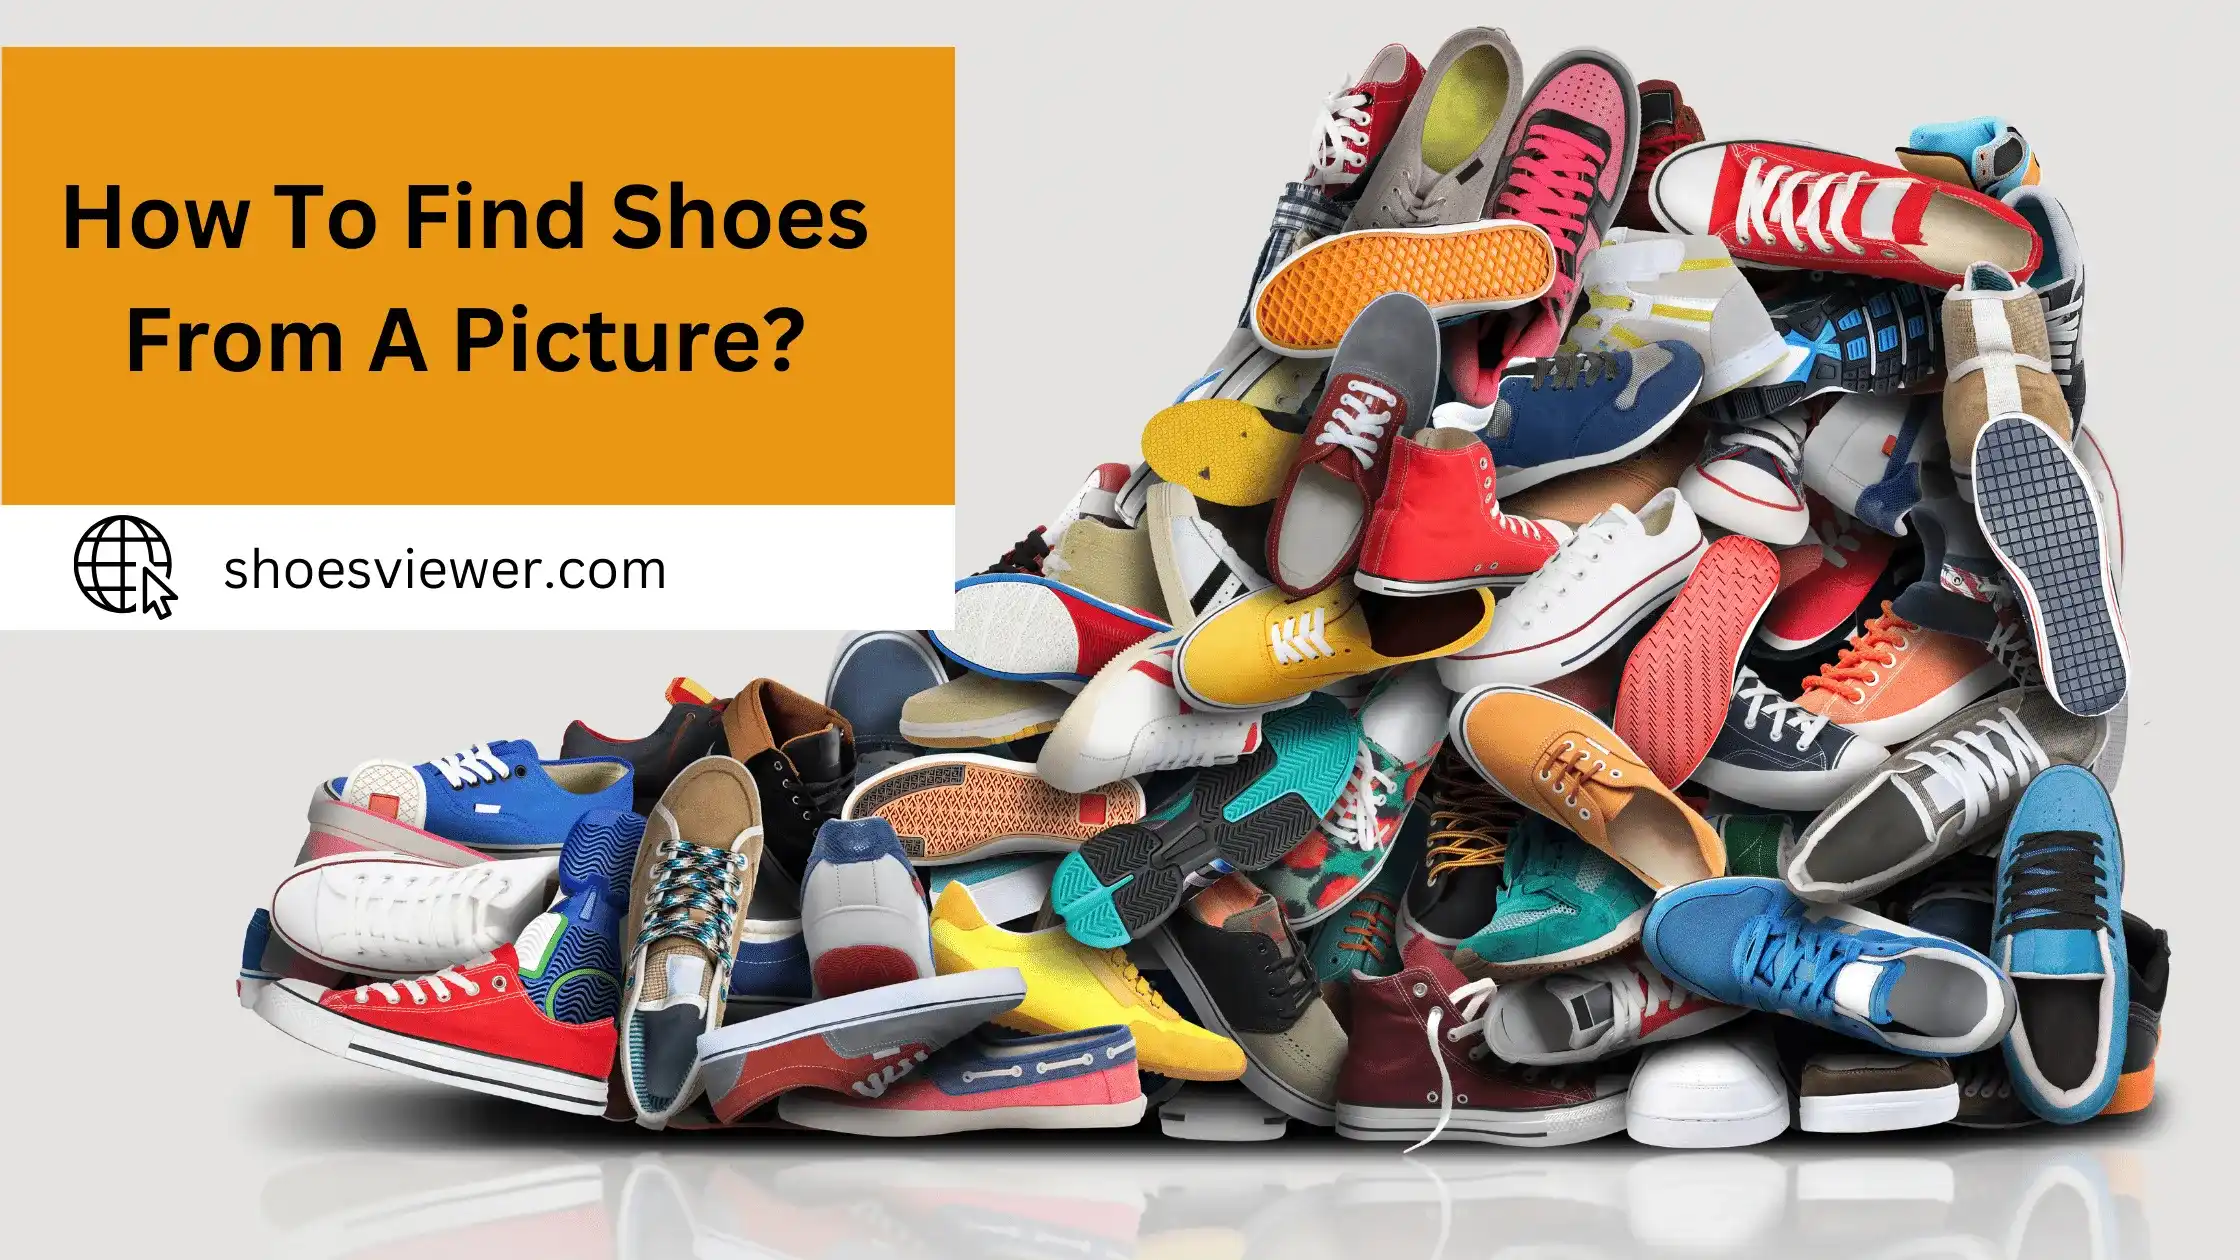 How To Find Shoes From A Picture? Detailed Information